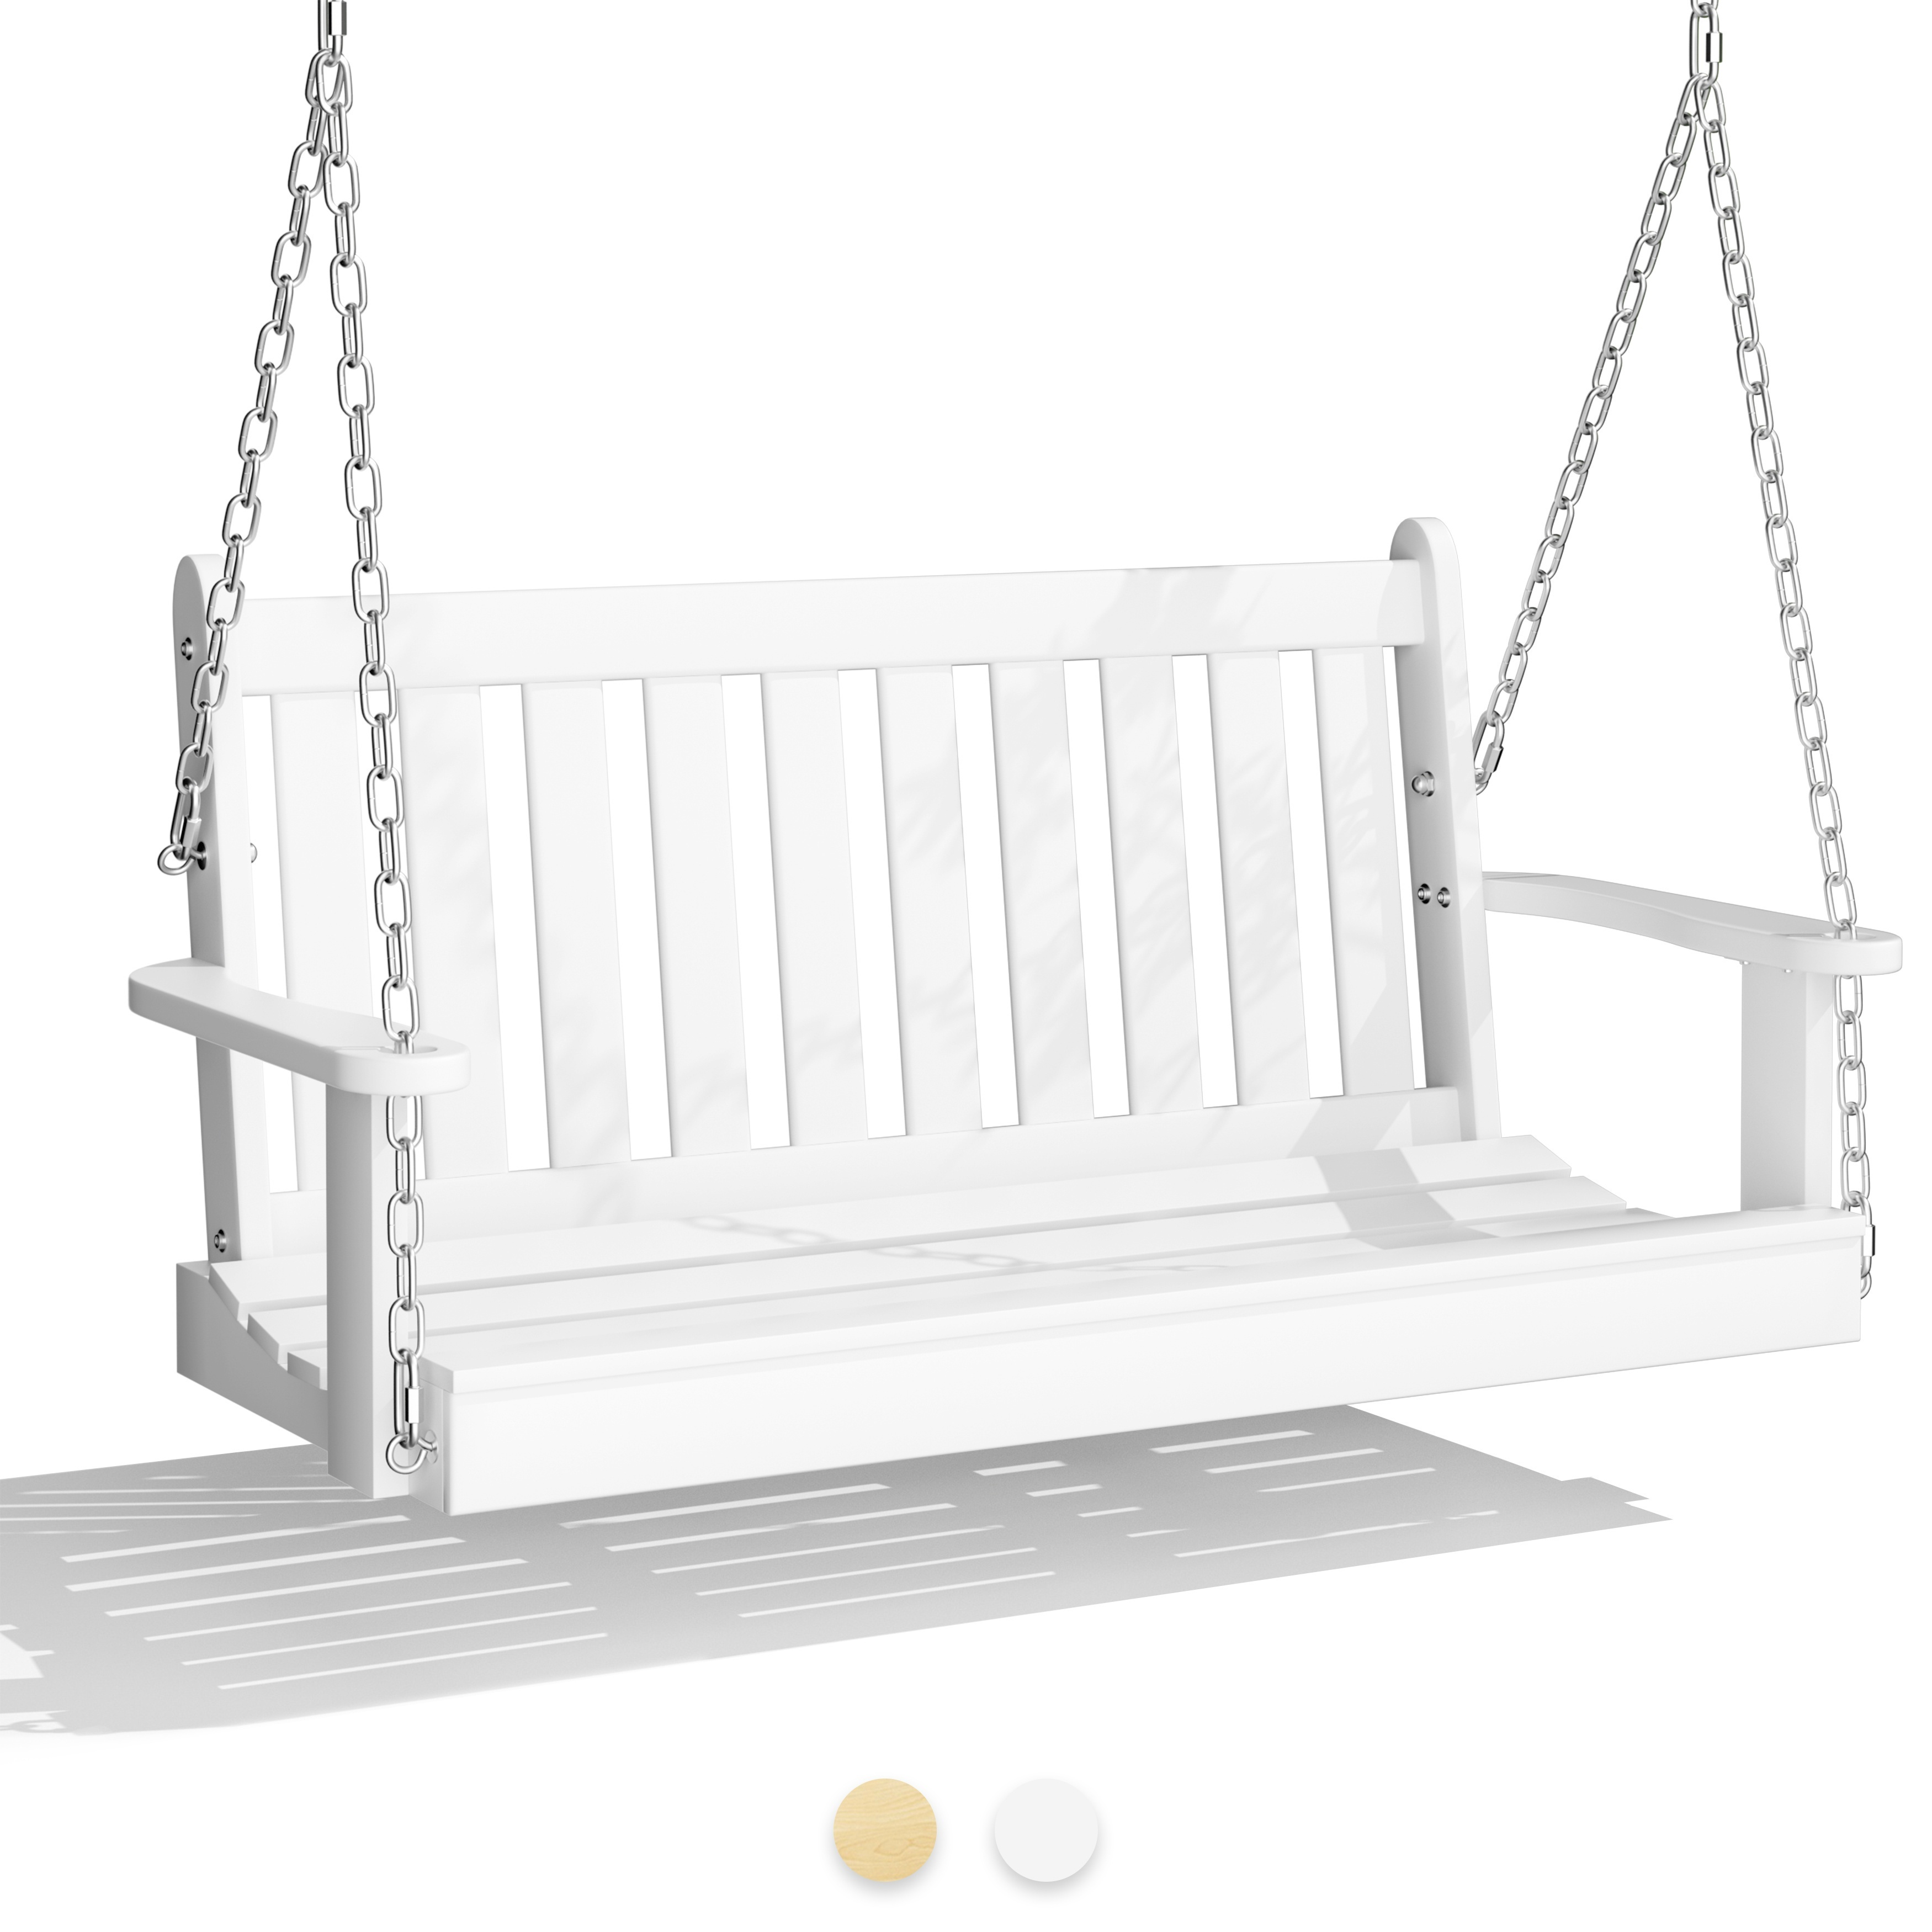 

Anbebe 49 Inch Wooden Porch Swing Outdoor Patio Hanging Bench Furniture For Deck, Garden, Yard With Mounting Chain, Curved Back Design, 500 Lbs Weight Capacity - White